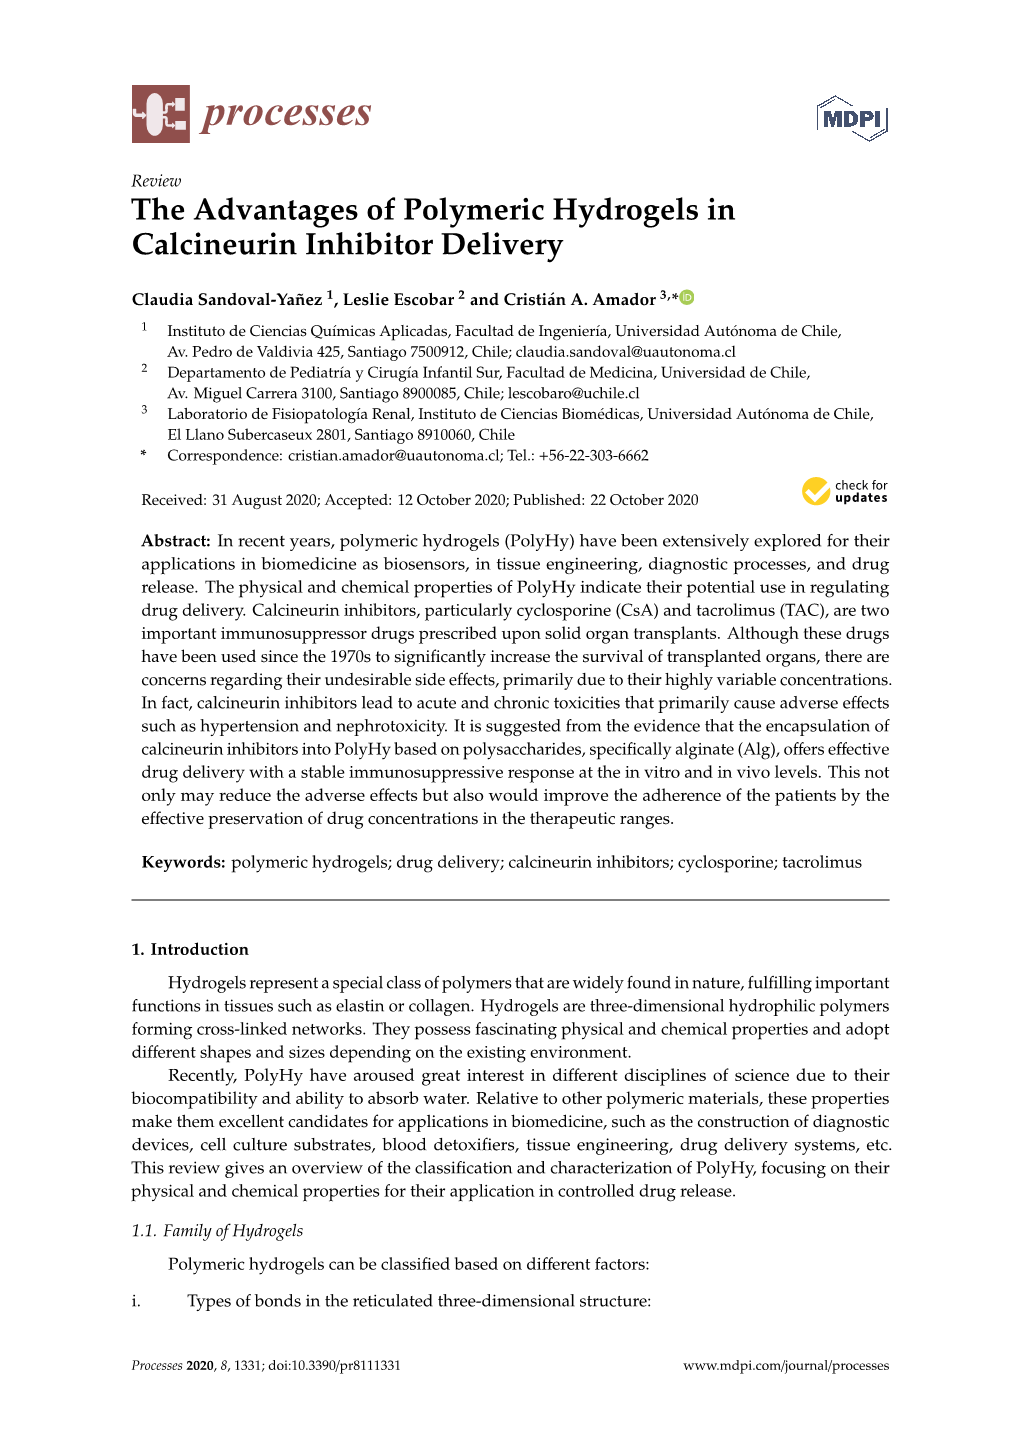 The Advantages of Polymeric Hydrogels in Calcineurin Inhibitor Delivery